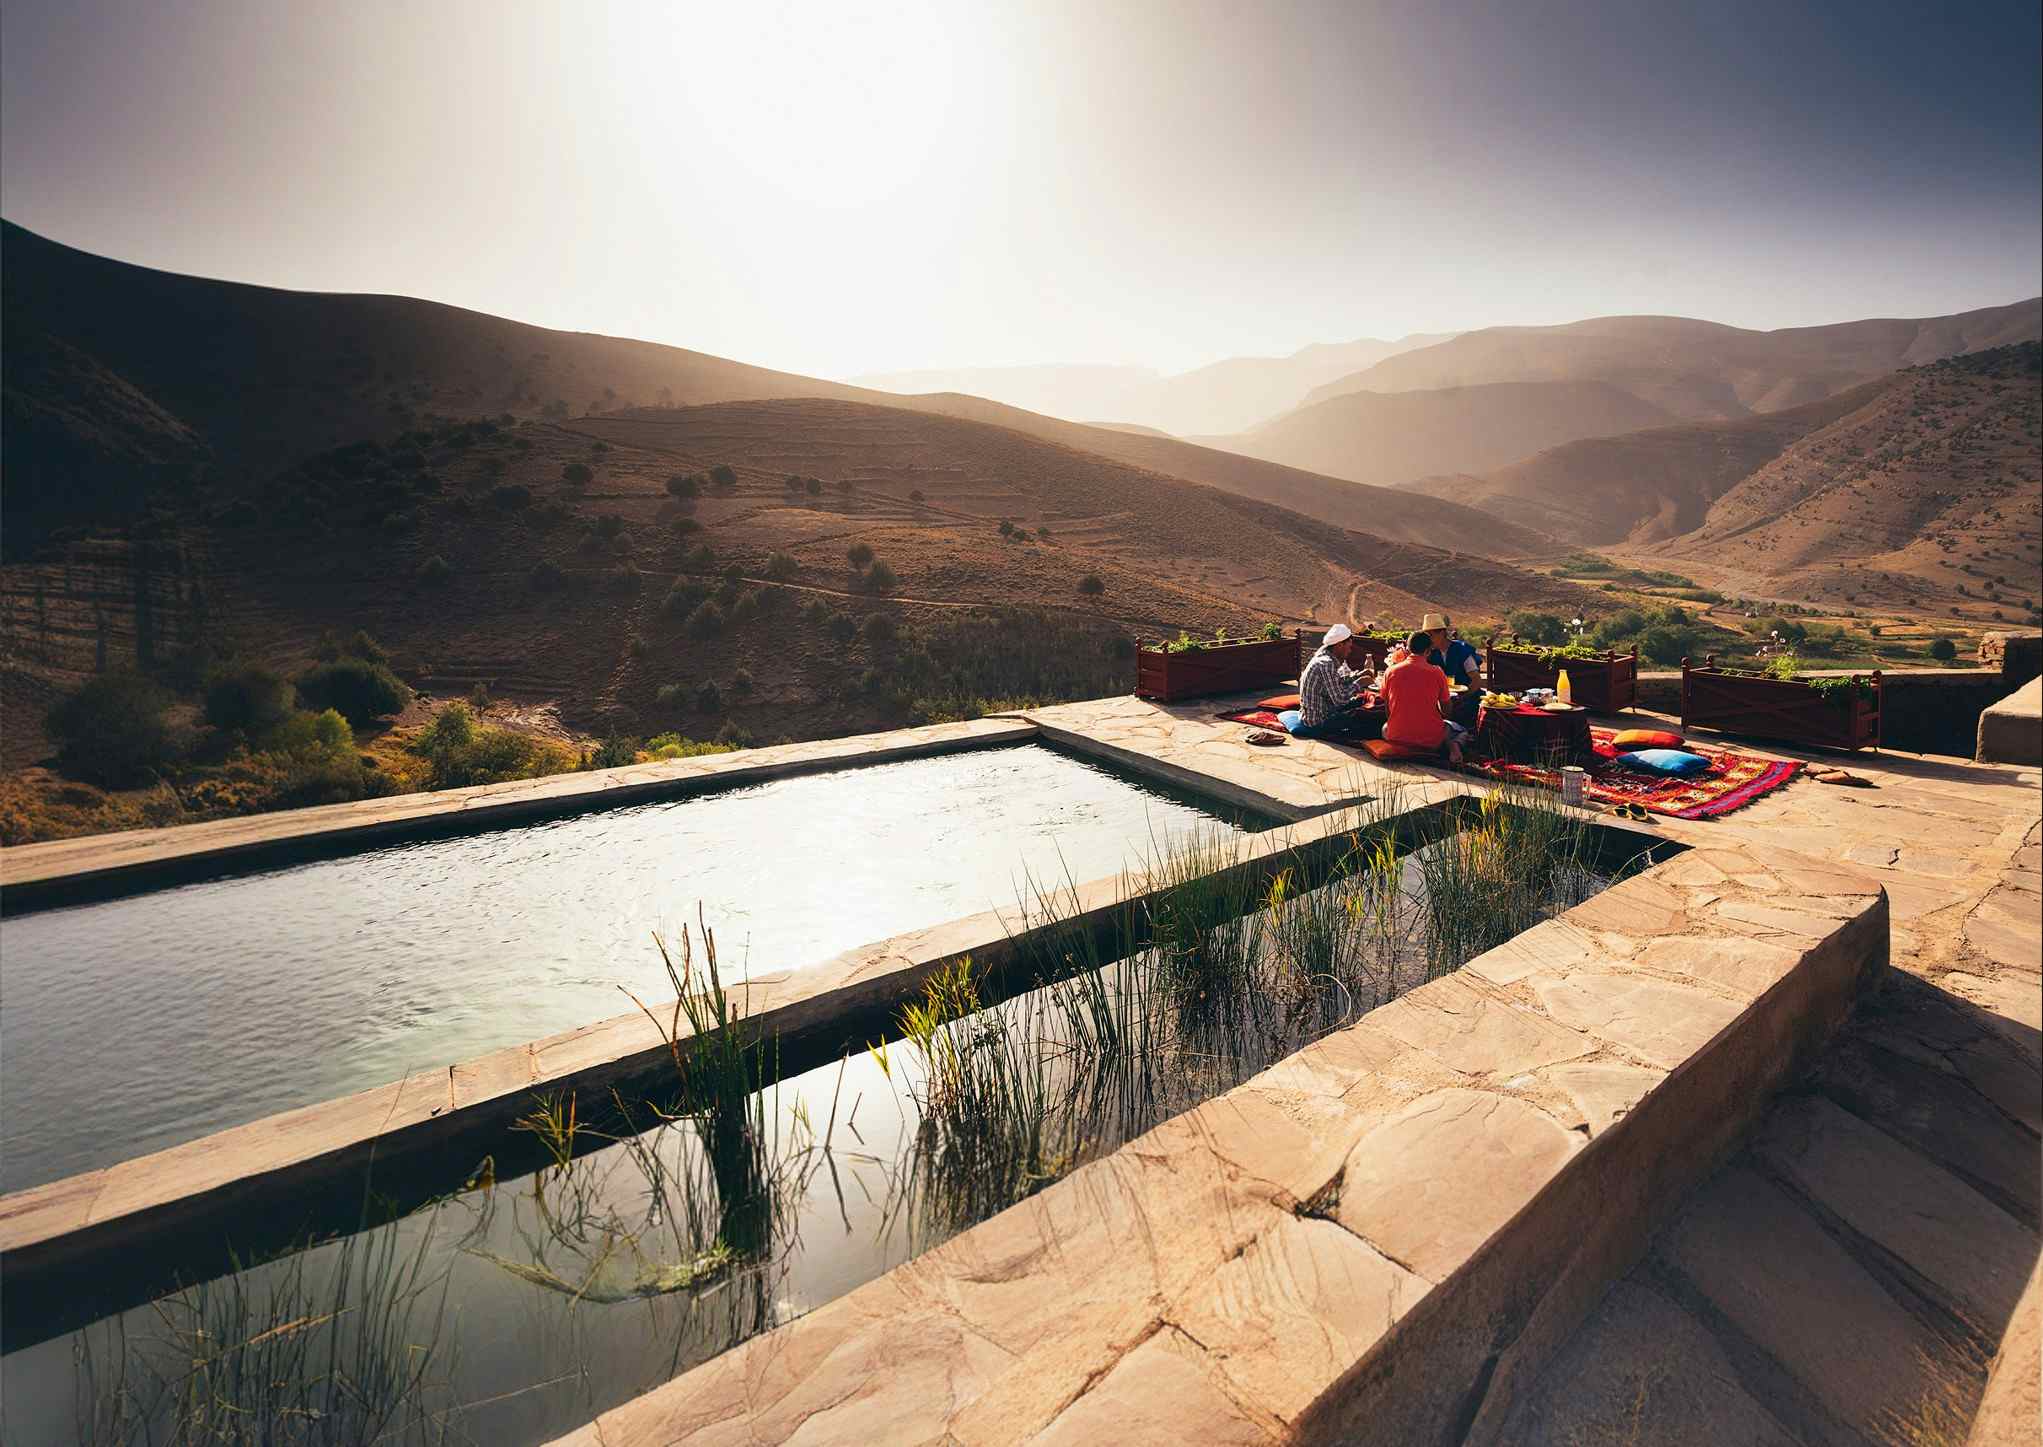 View of a pool and people eating food in front of the mountain view in Morocco.